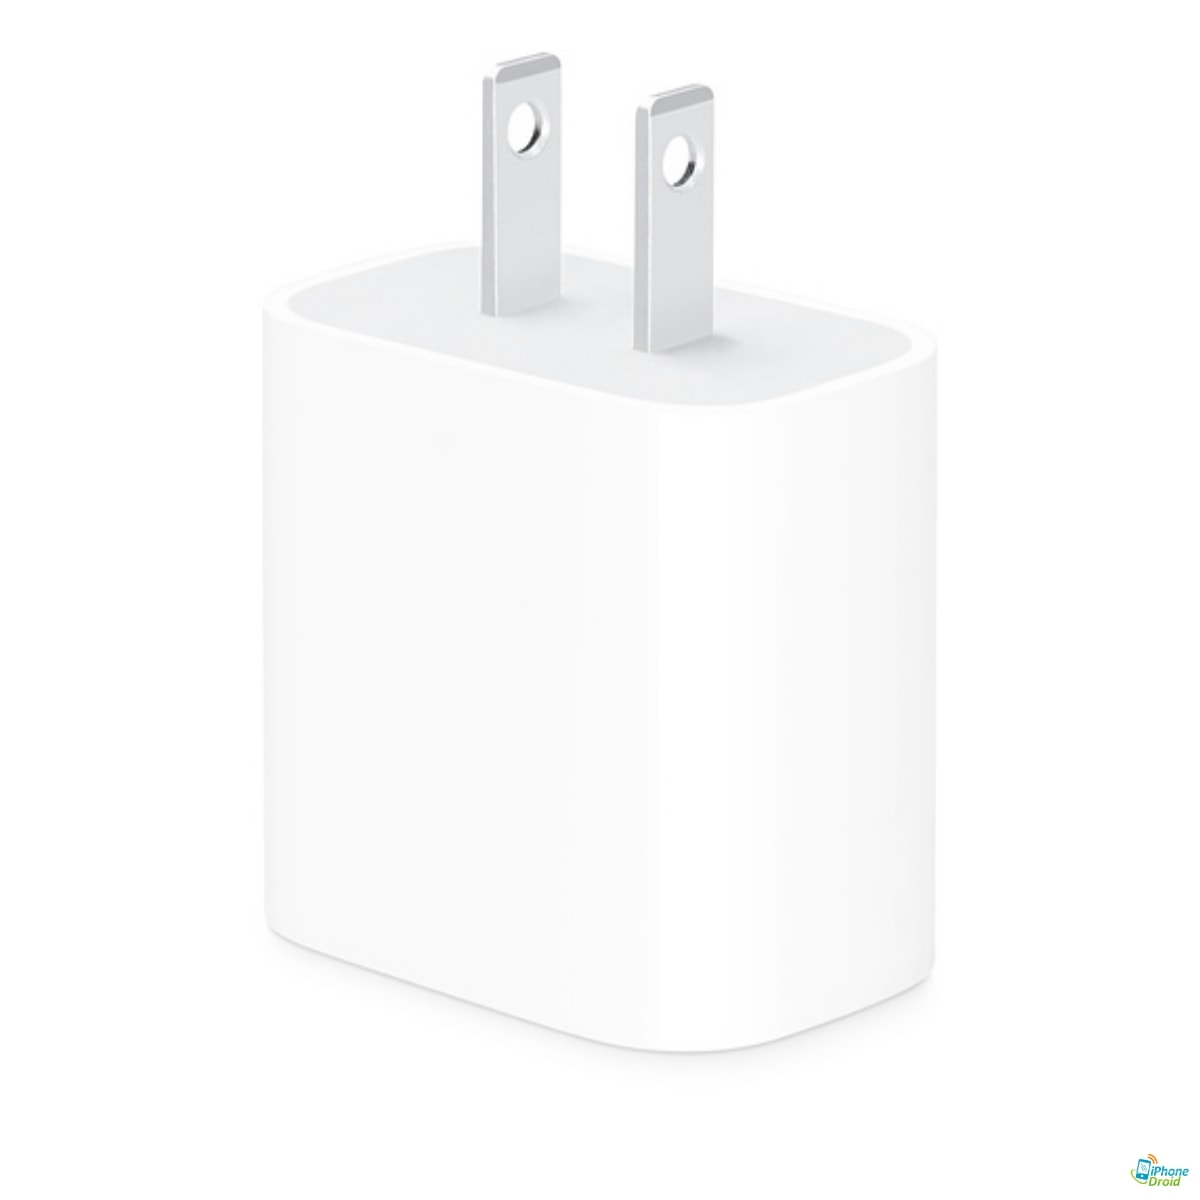 How to use your MagSafe Charger with iPhone 12 models